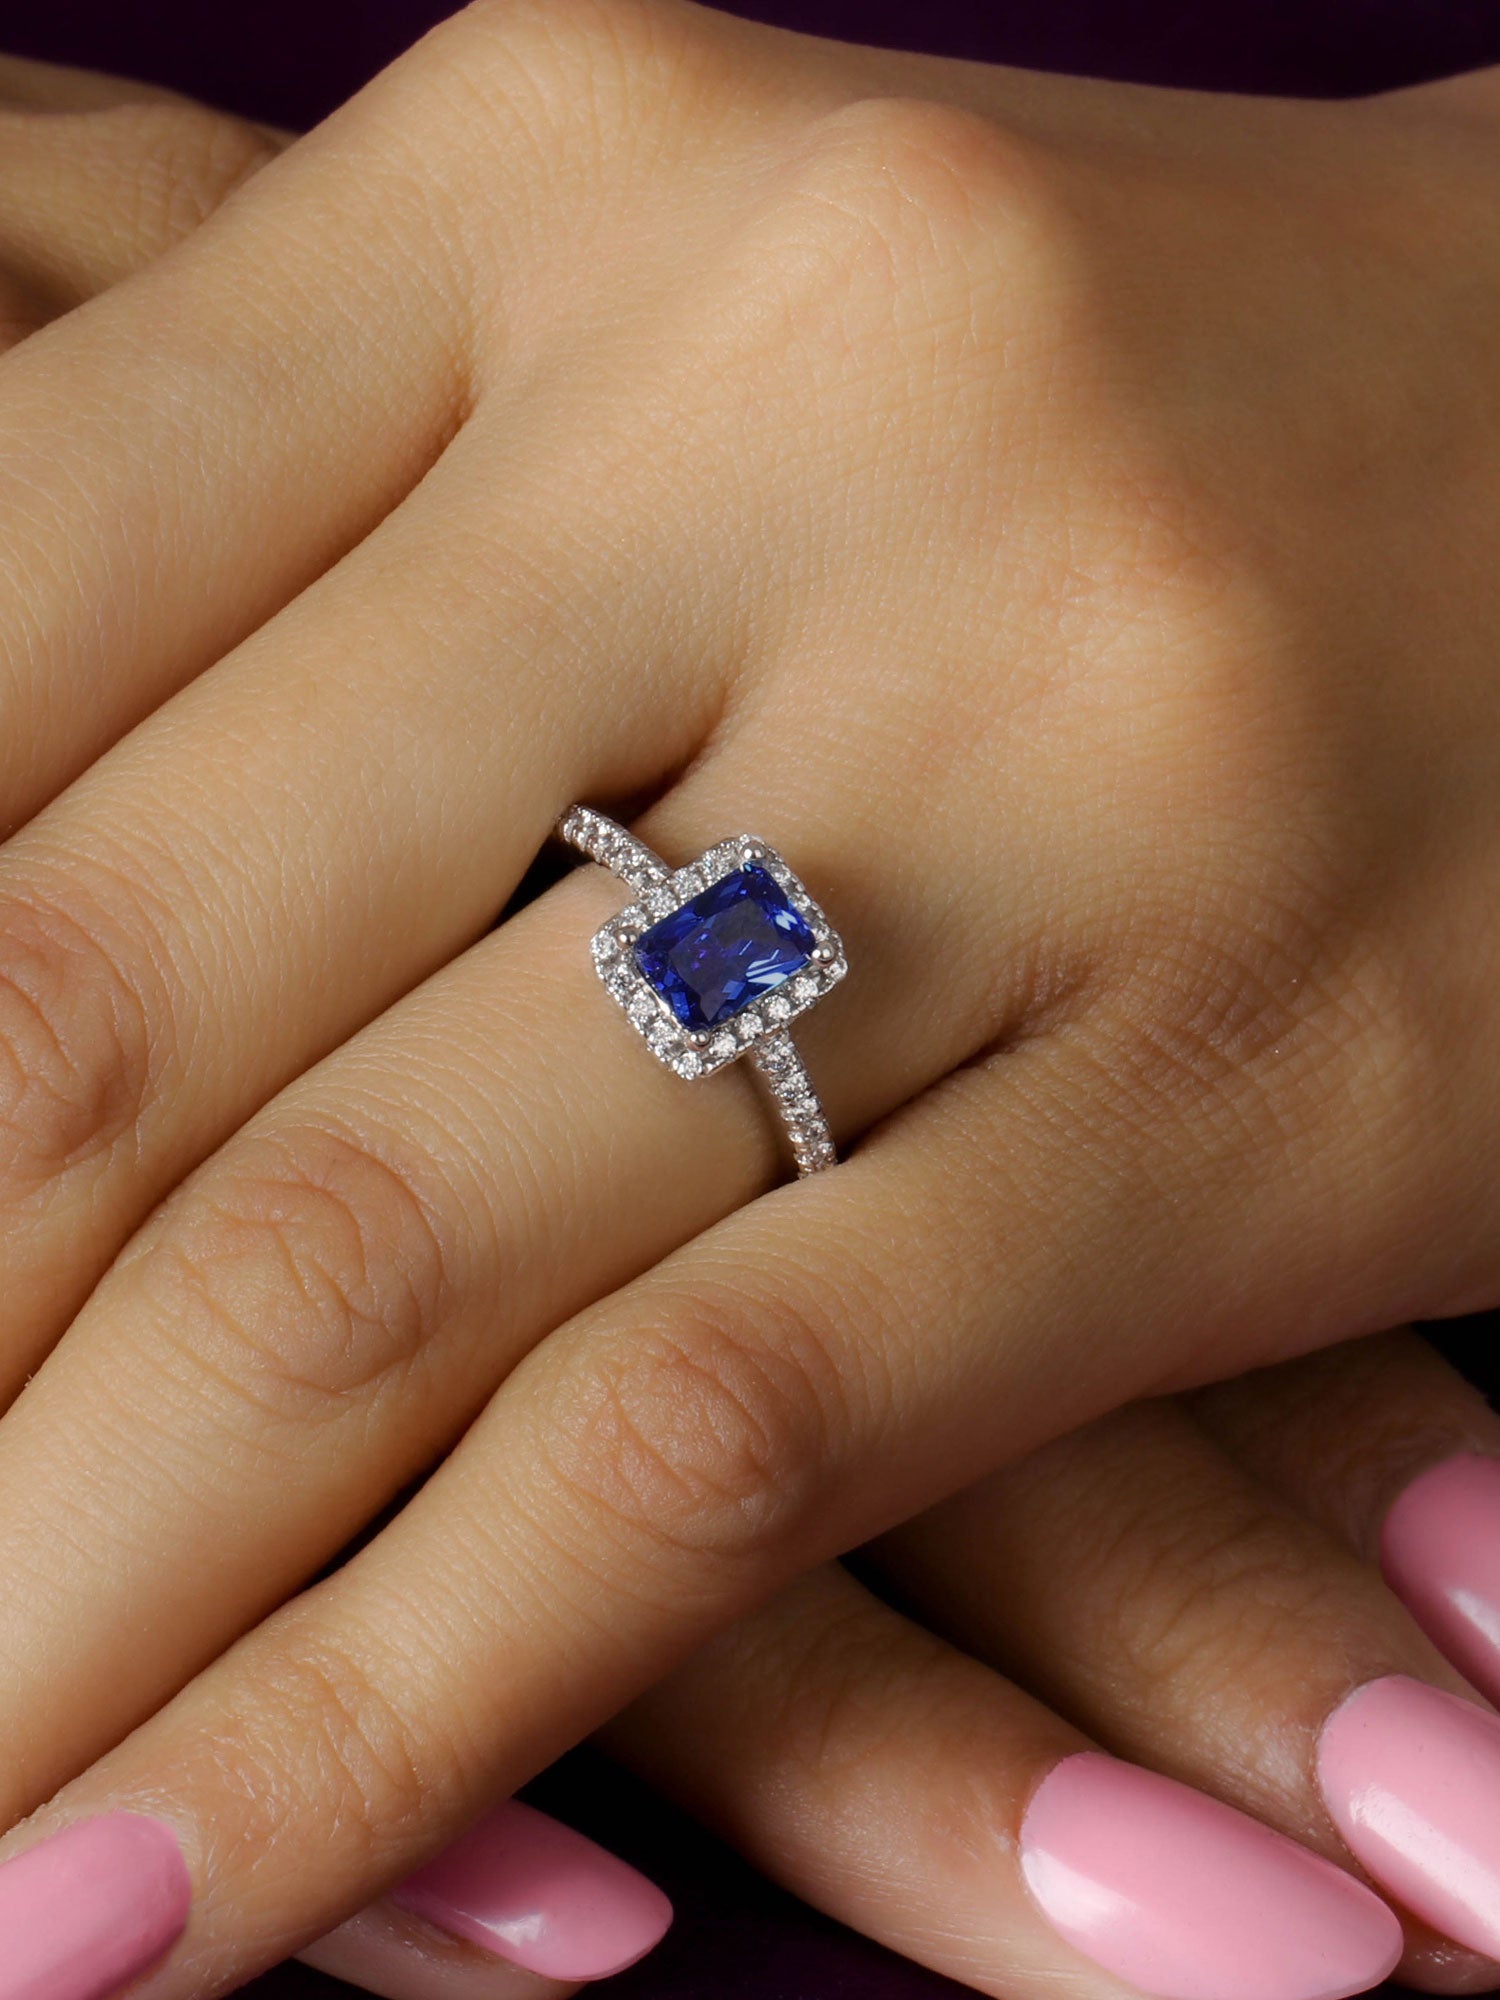 OCATGON LAB CREATED BLUE SAPPHIRE RING FOR HER-1